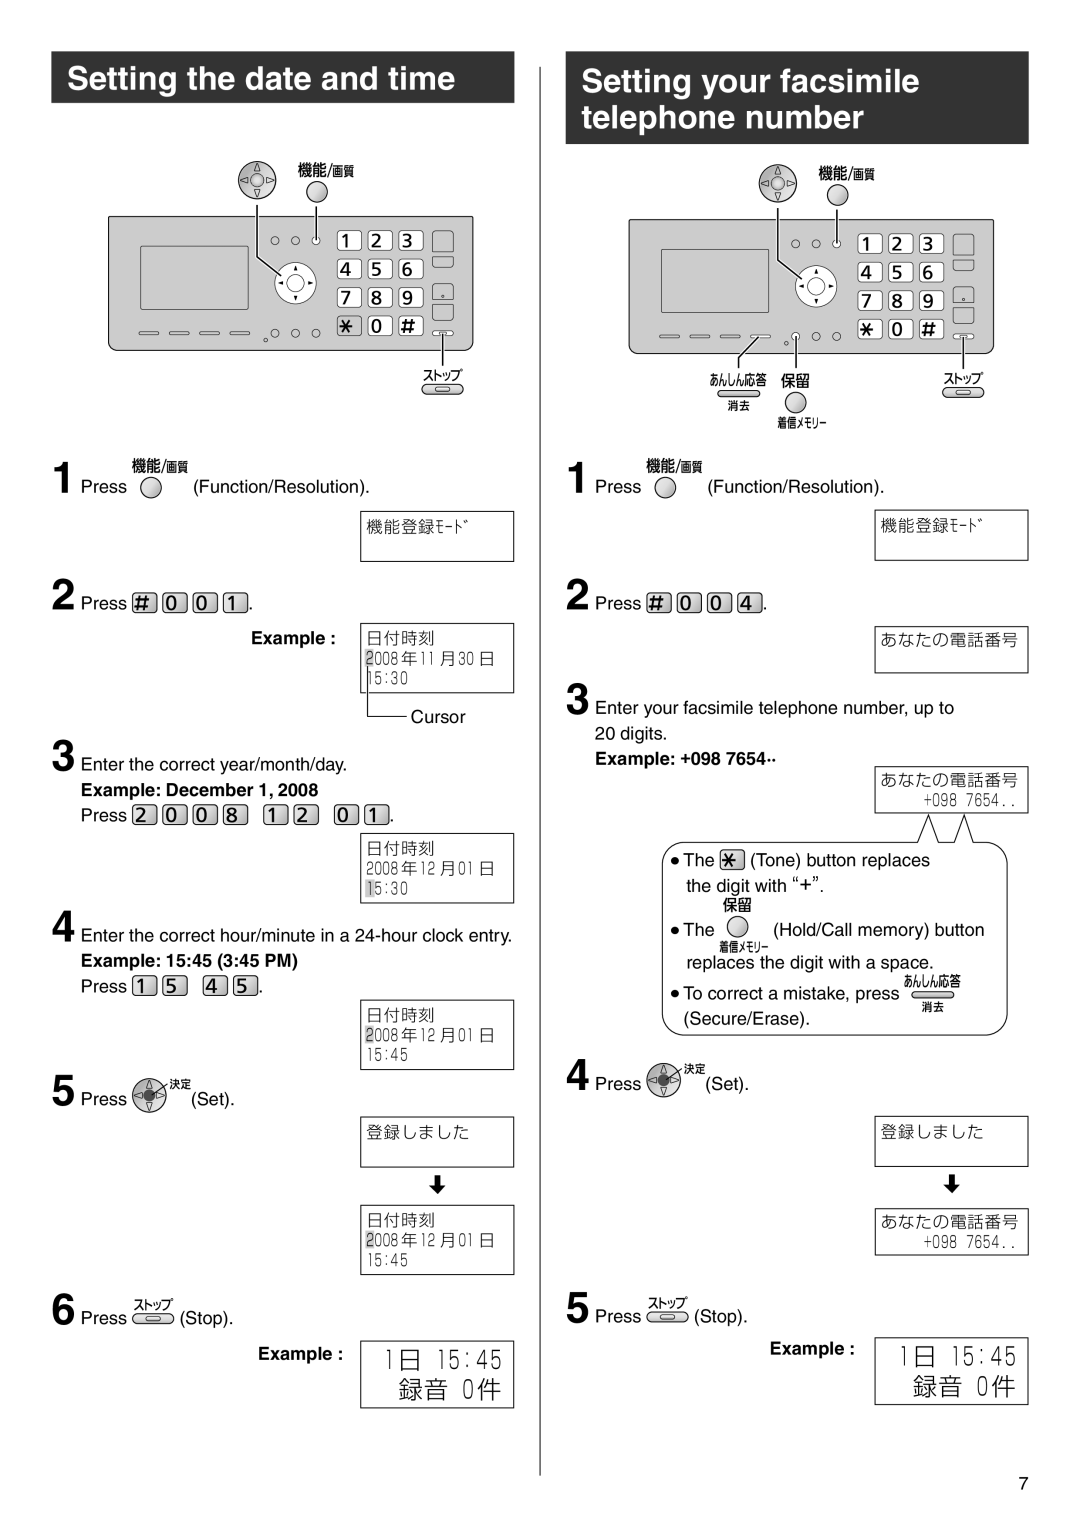 Panasonic KX-PW708DWE5 Setting the date and time, Setting your facsimile telephone number, 録音 0 件, Example 日付時刻 